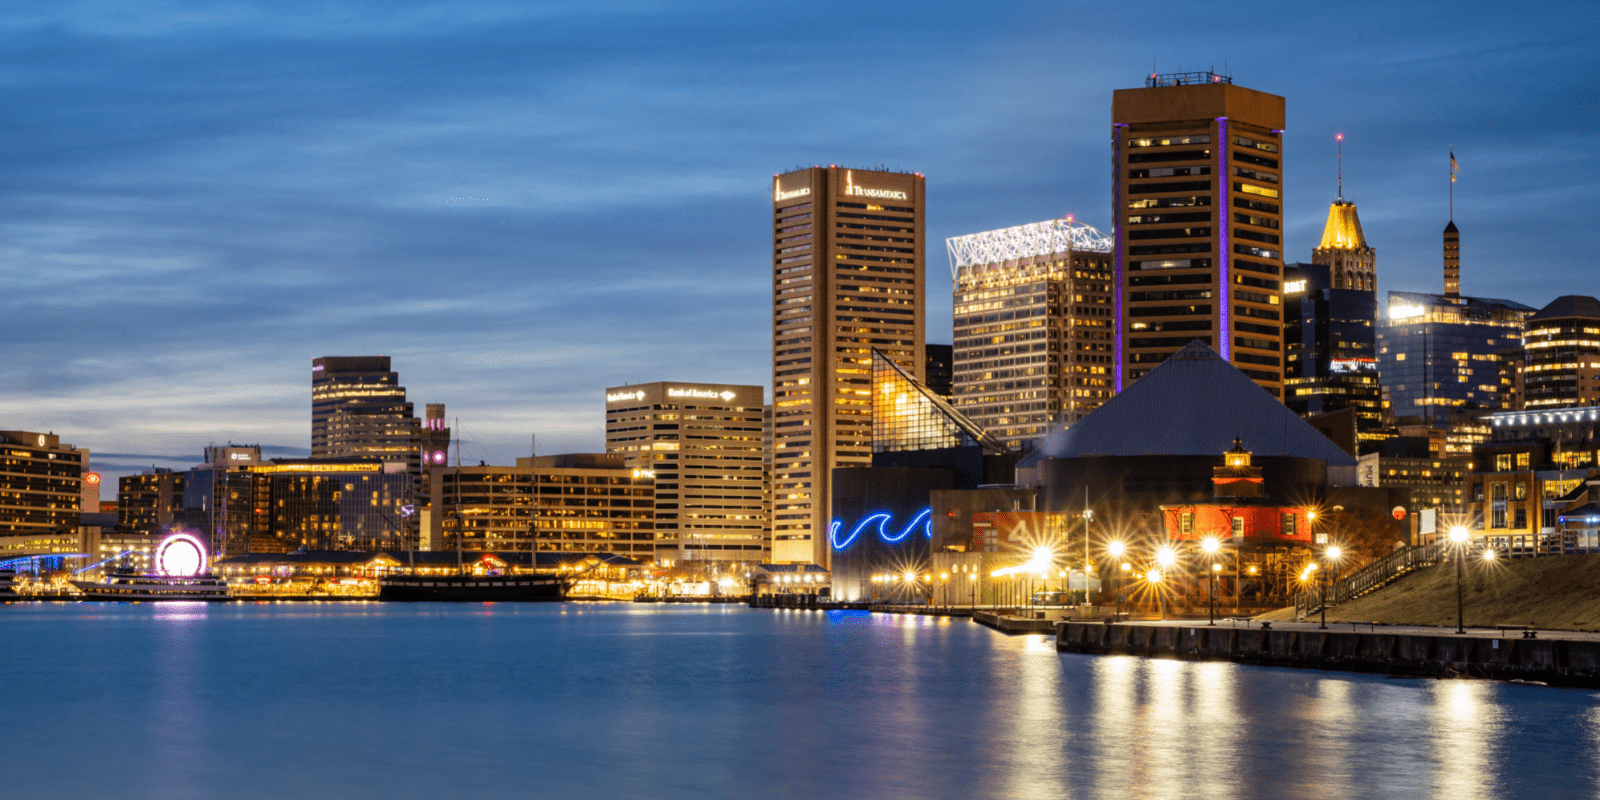 Best things to do in baltimore